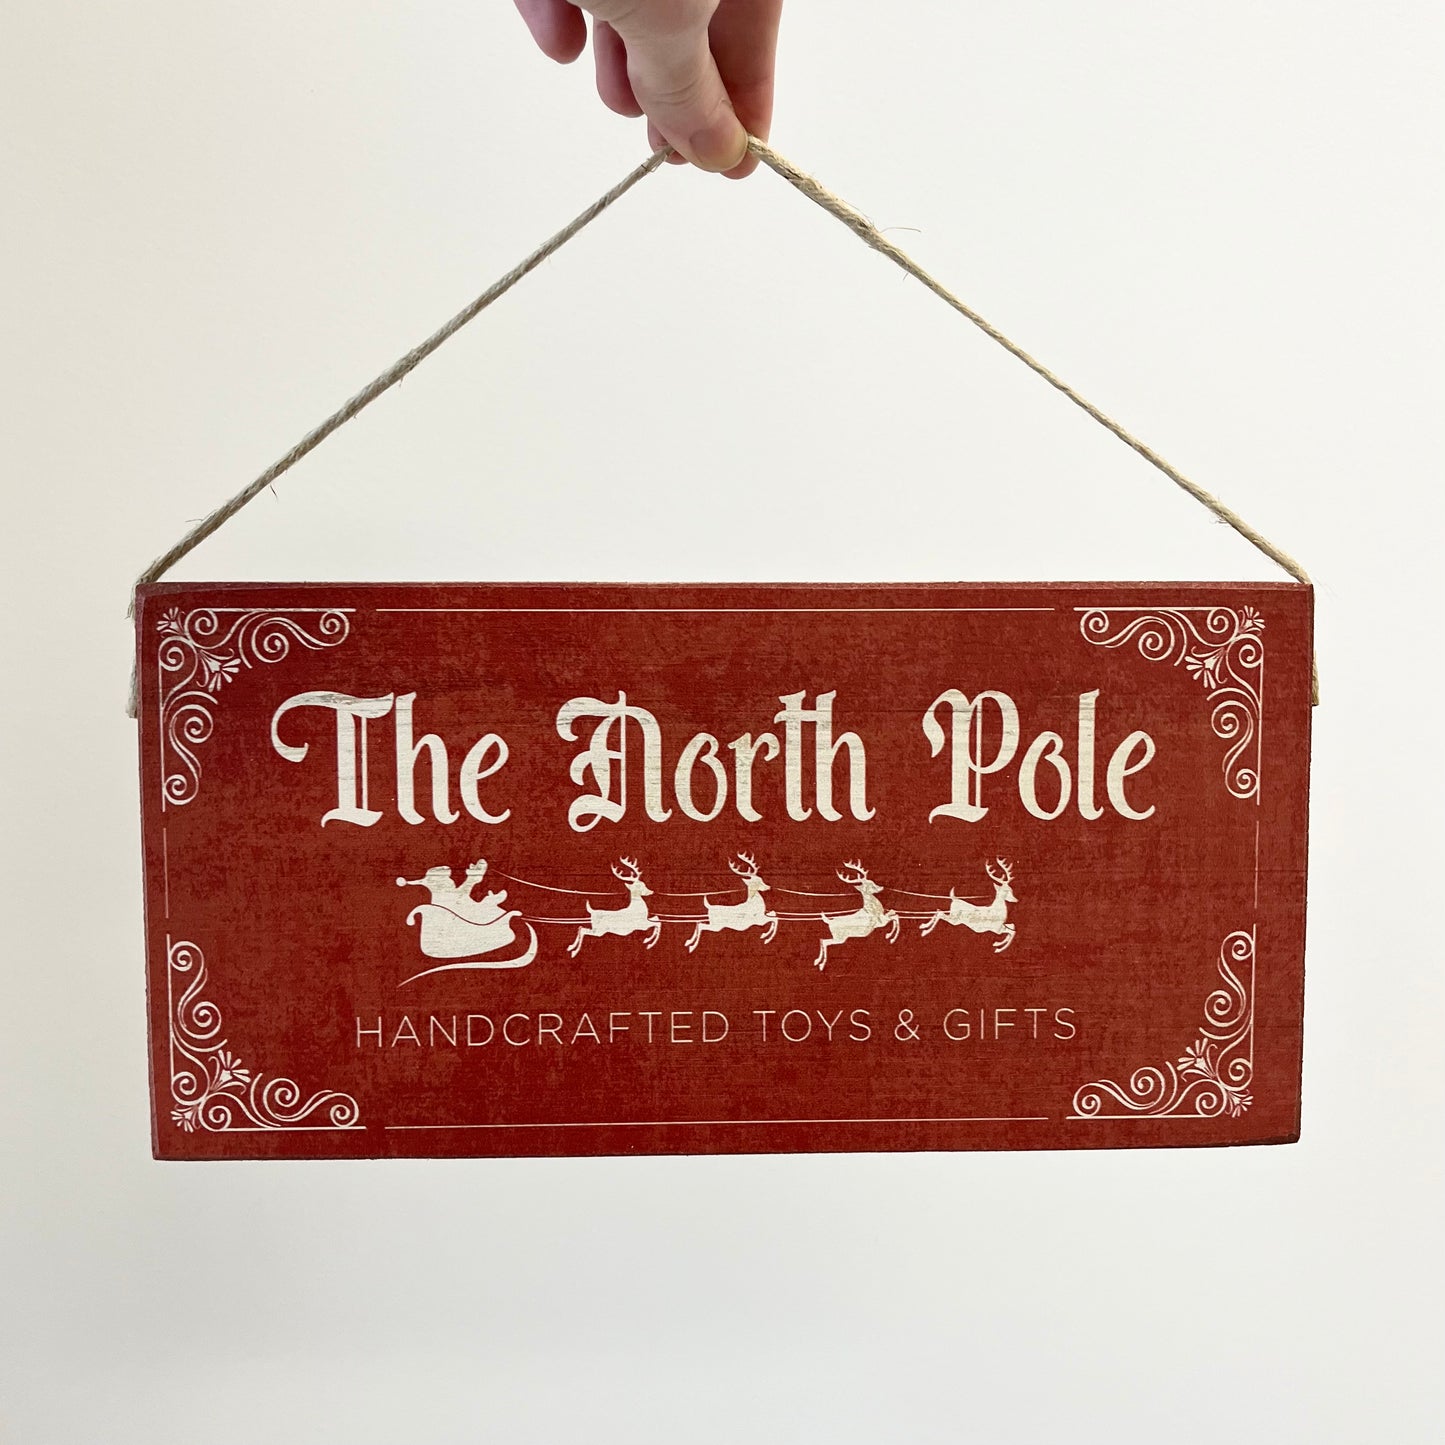 North Pole wooden sign